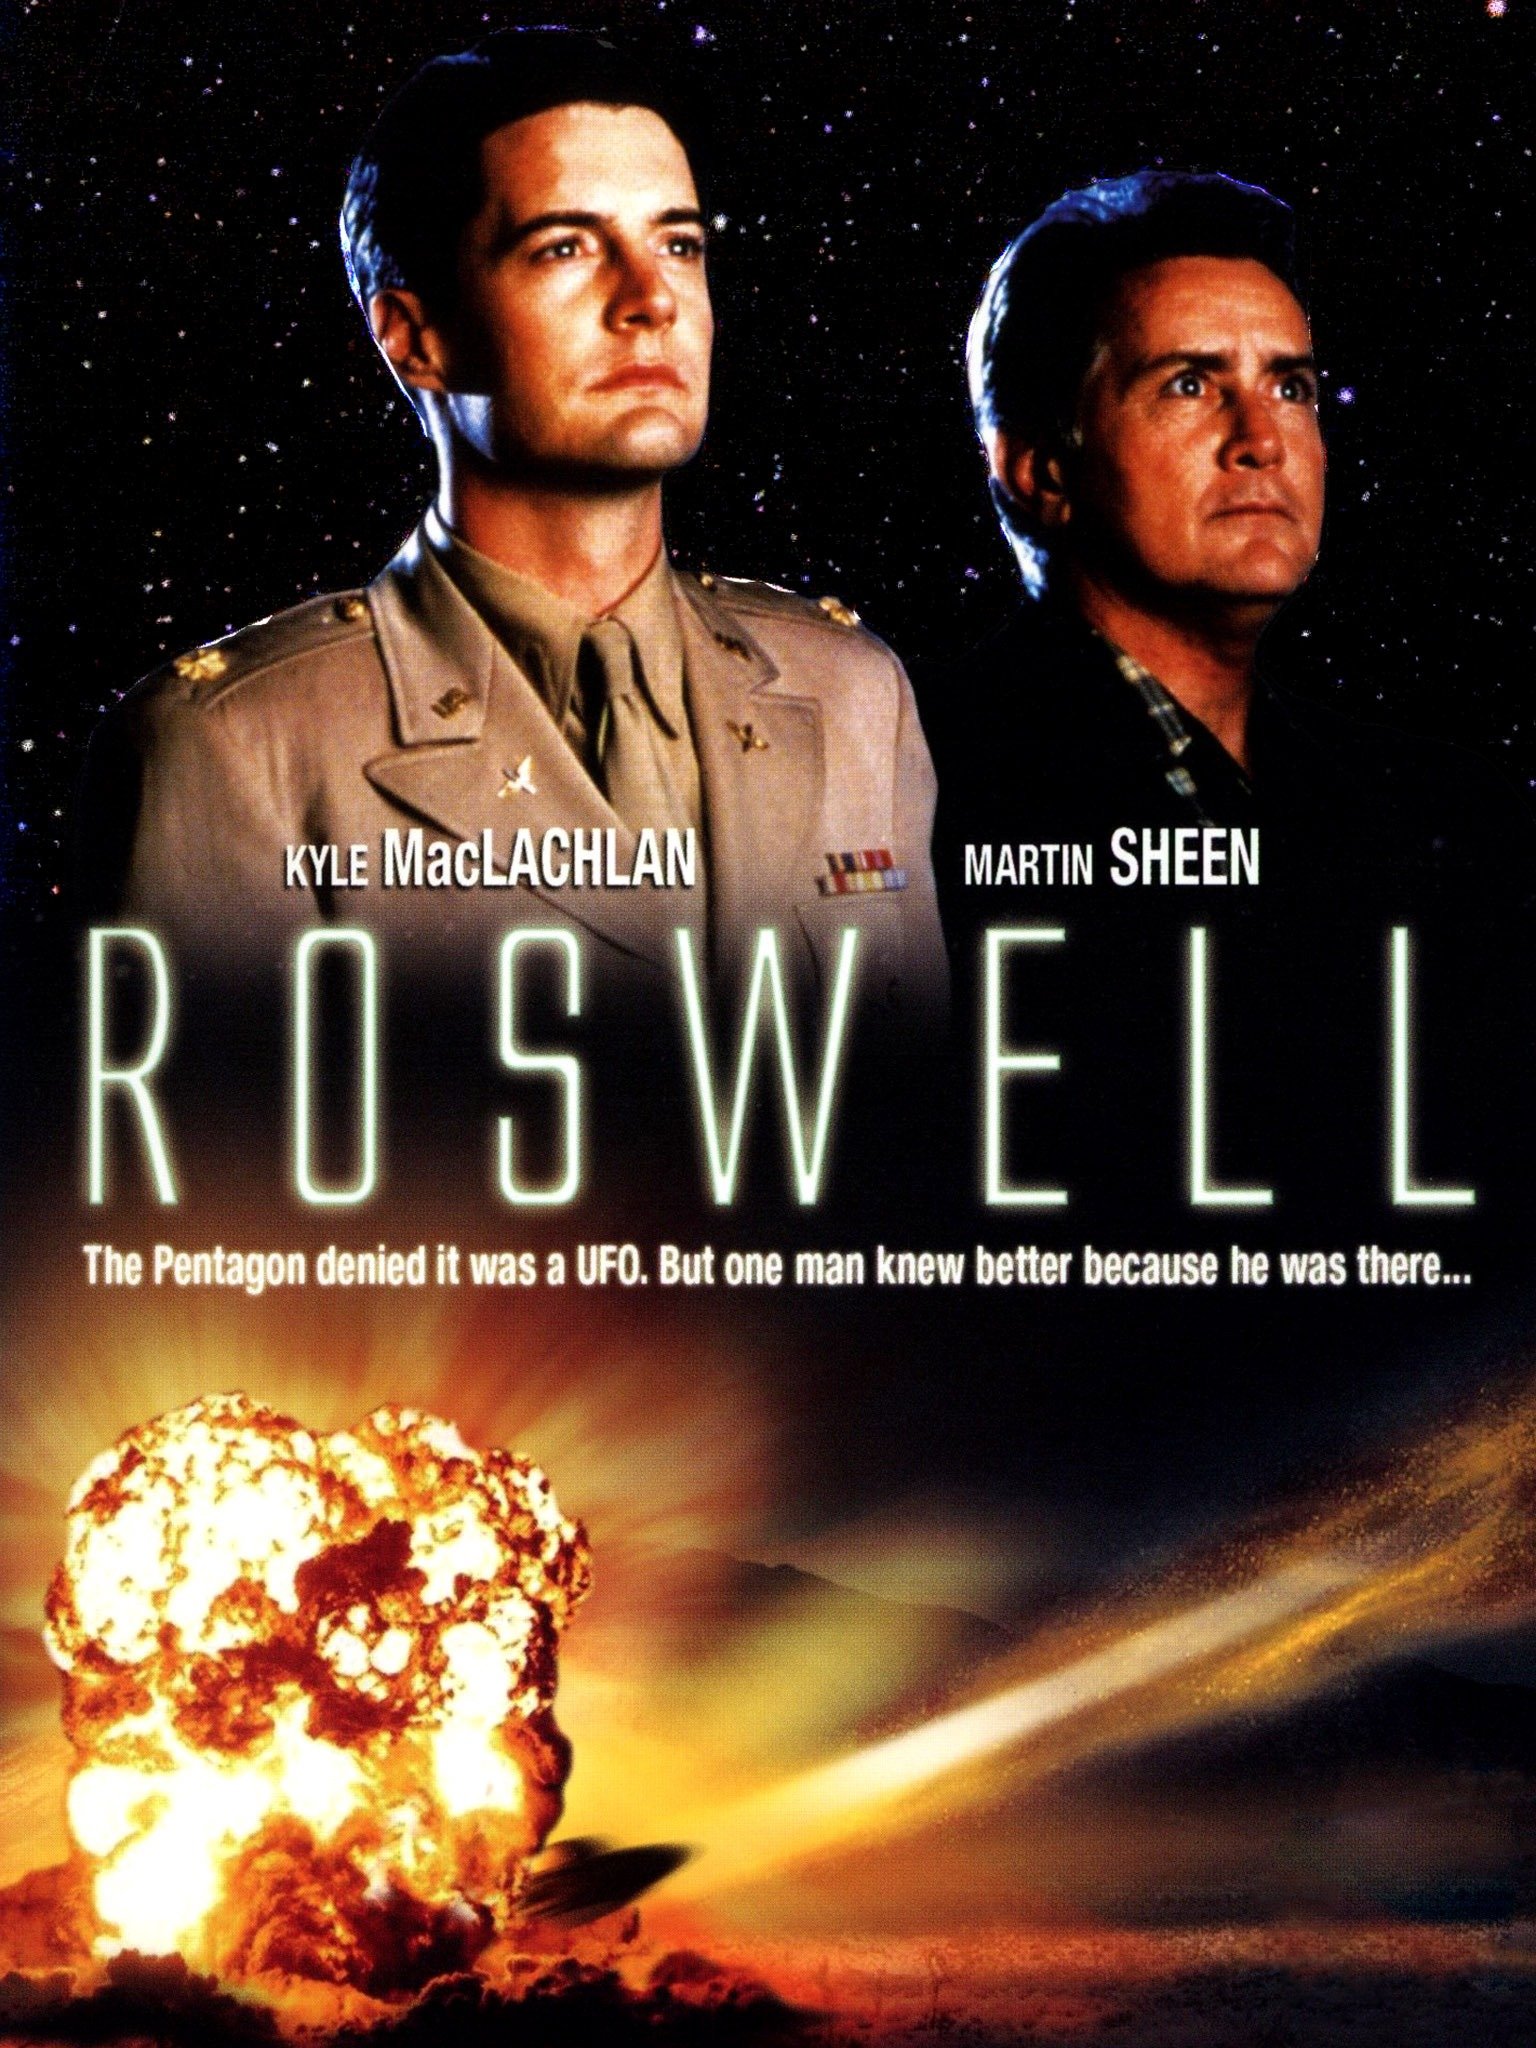 Roswell - Movie Reviews